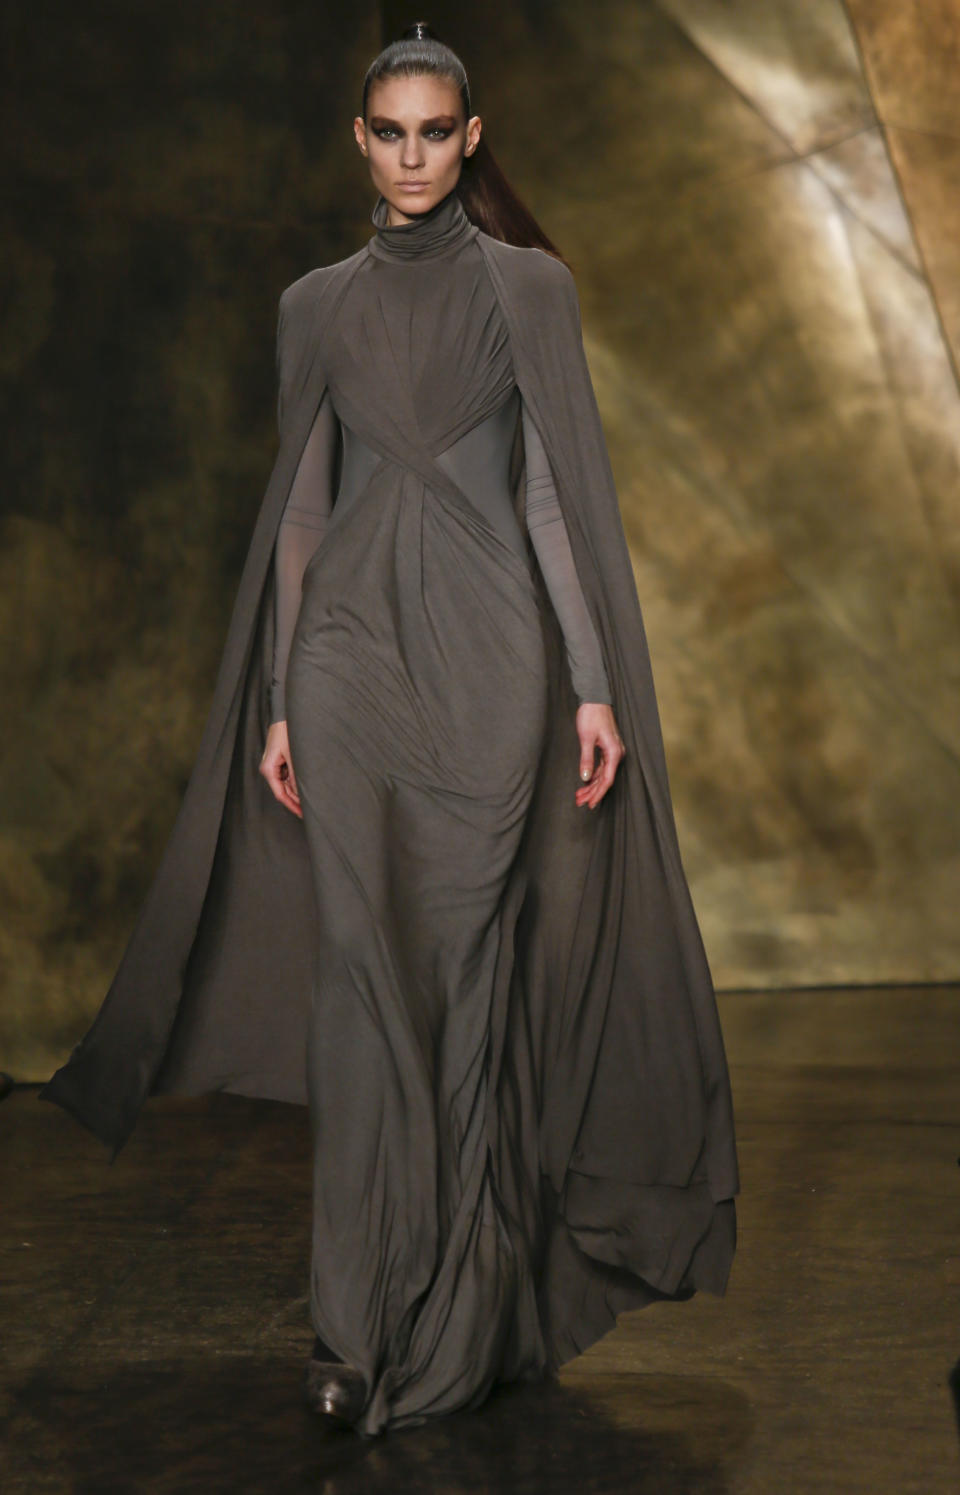 Fashion from the Fall 2013 collection of Donna Karan New York is modeled on Monday, Feb. 11, 2013 in New York. (AP Photo/Bebeto Matthews)